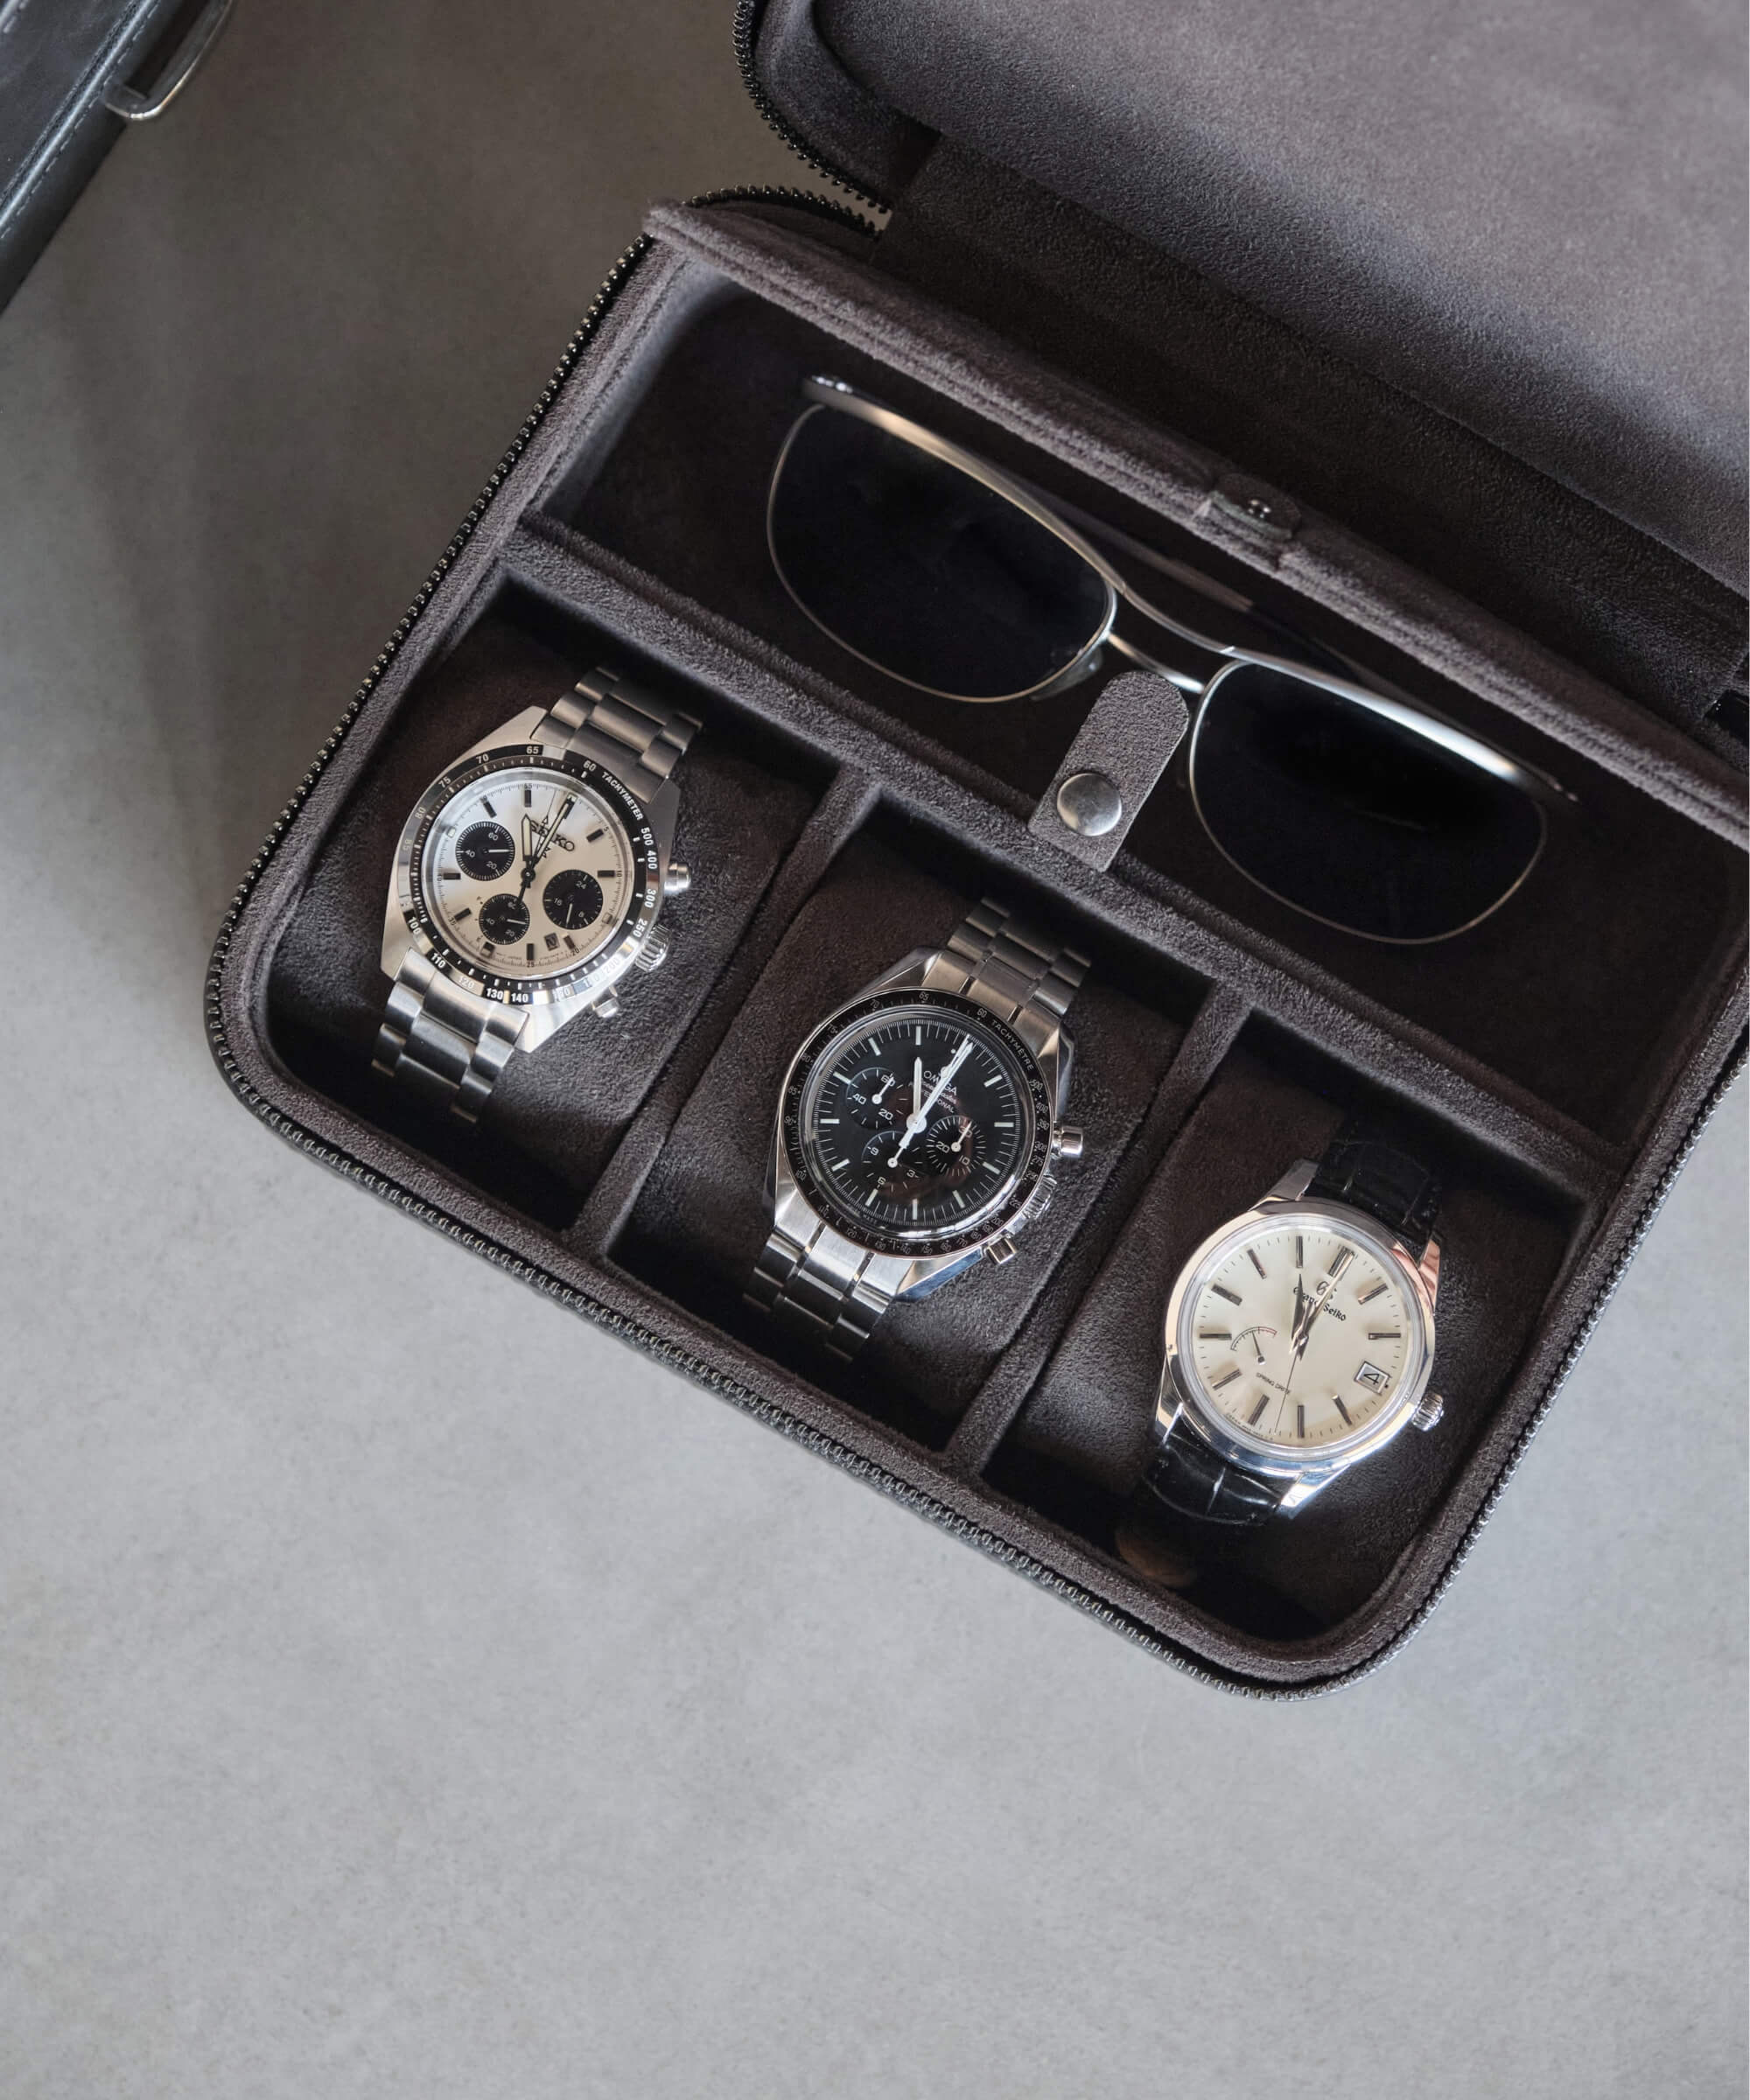 A TAWBURY Fraser 3 Watch Travel Case with Storage - Black that provides storage for four watches and sunglasses.